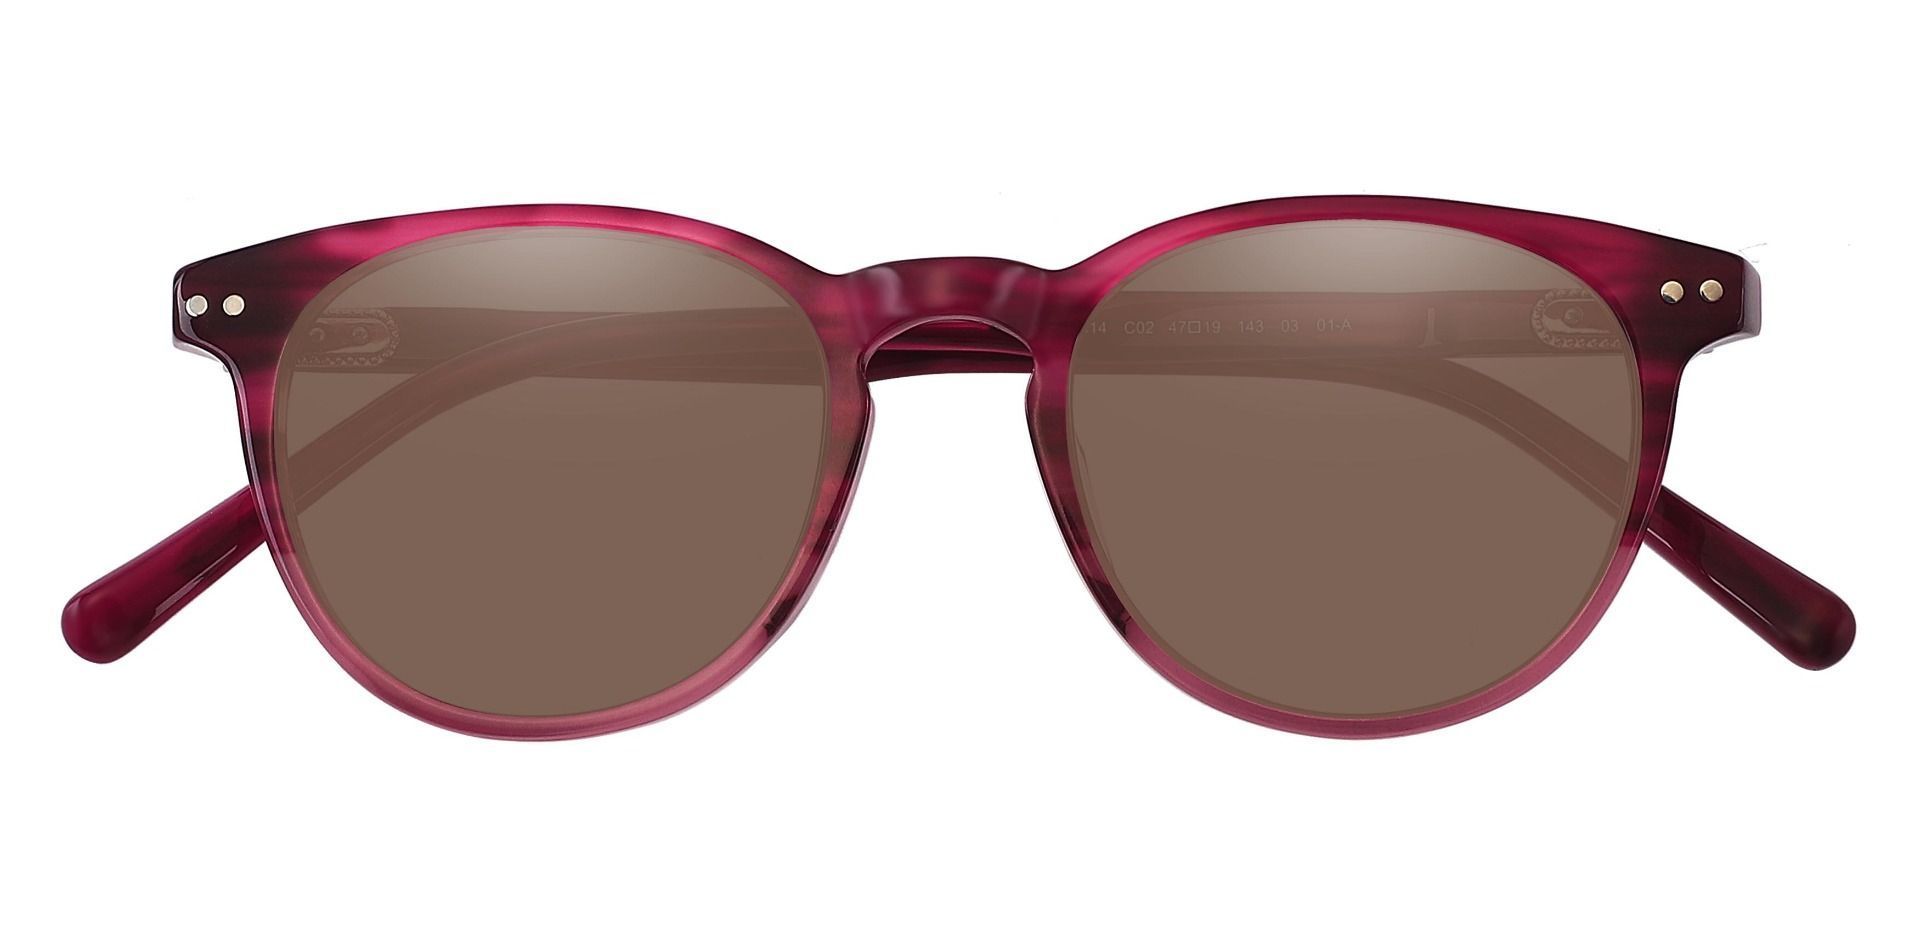 Marianna Oval Prescription Sunglasses - Red Frame With Brown Lenses